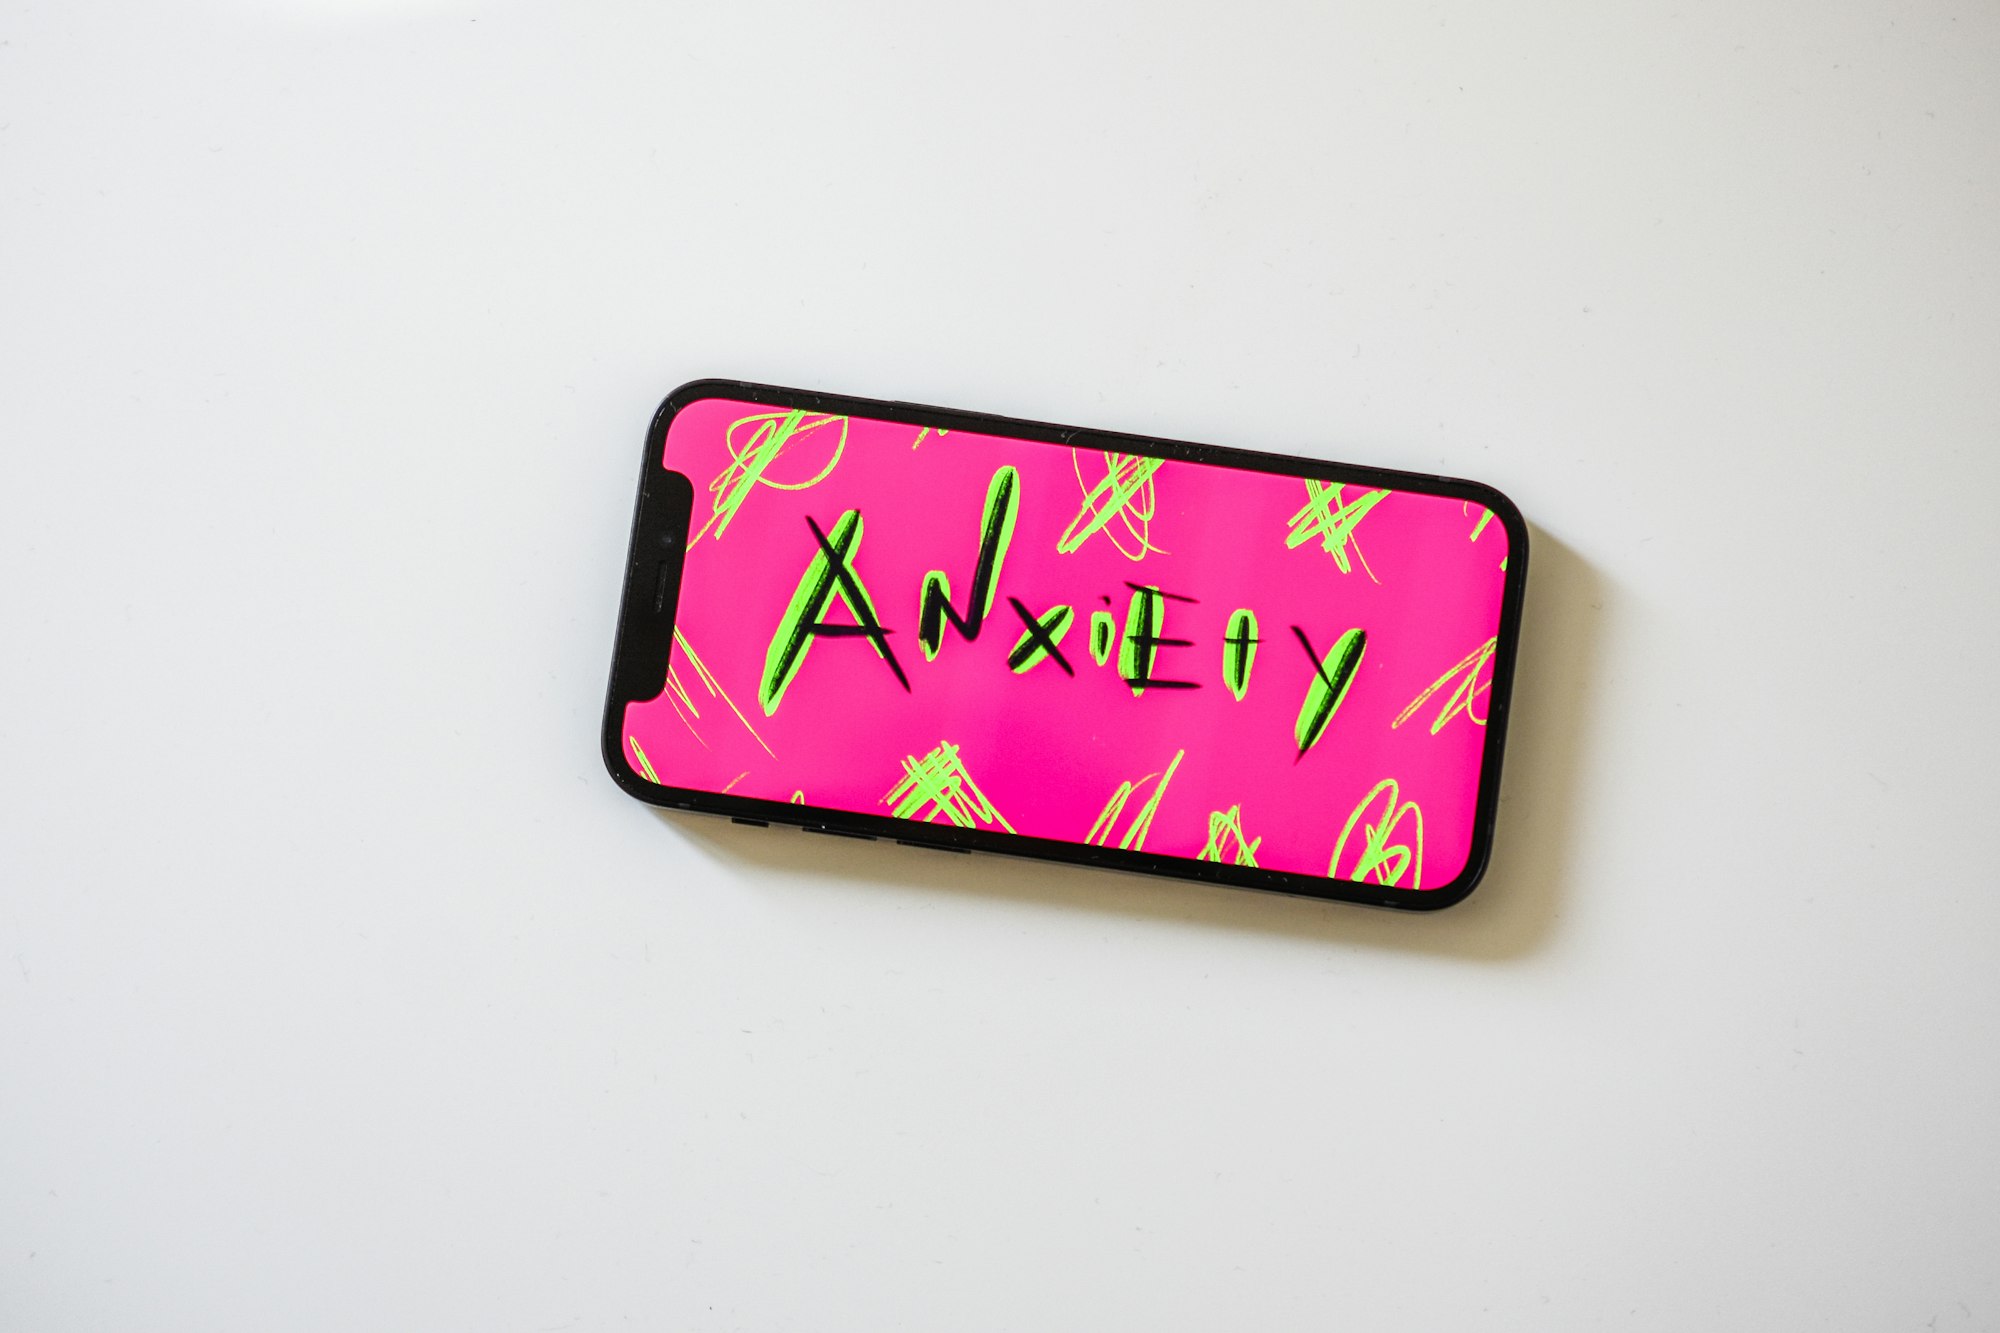 A cell phone with the work "anxiety" spelled on the front against a pink background